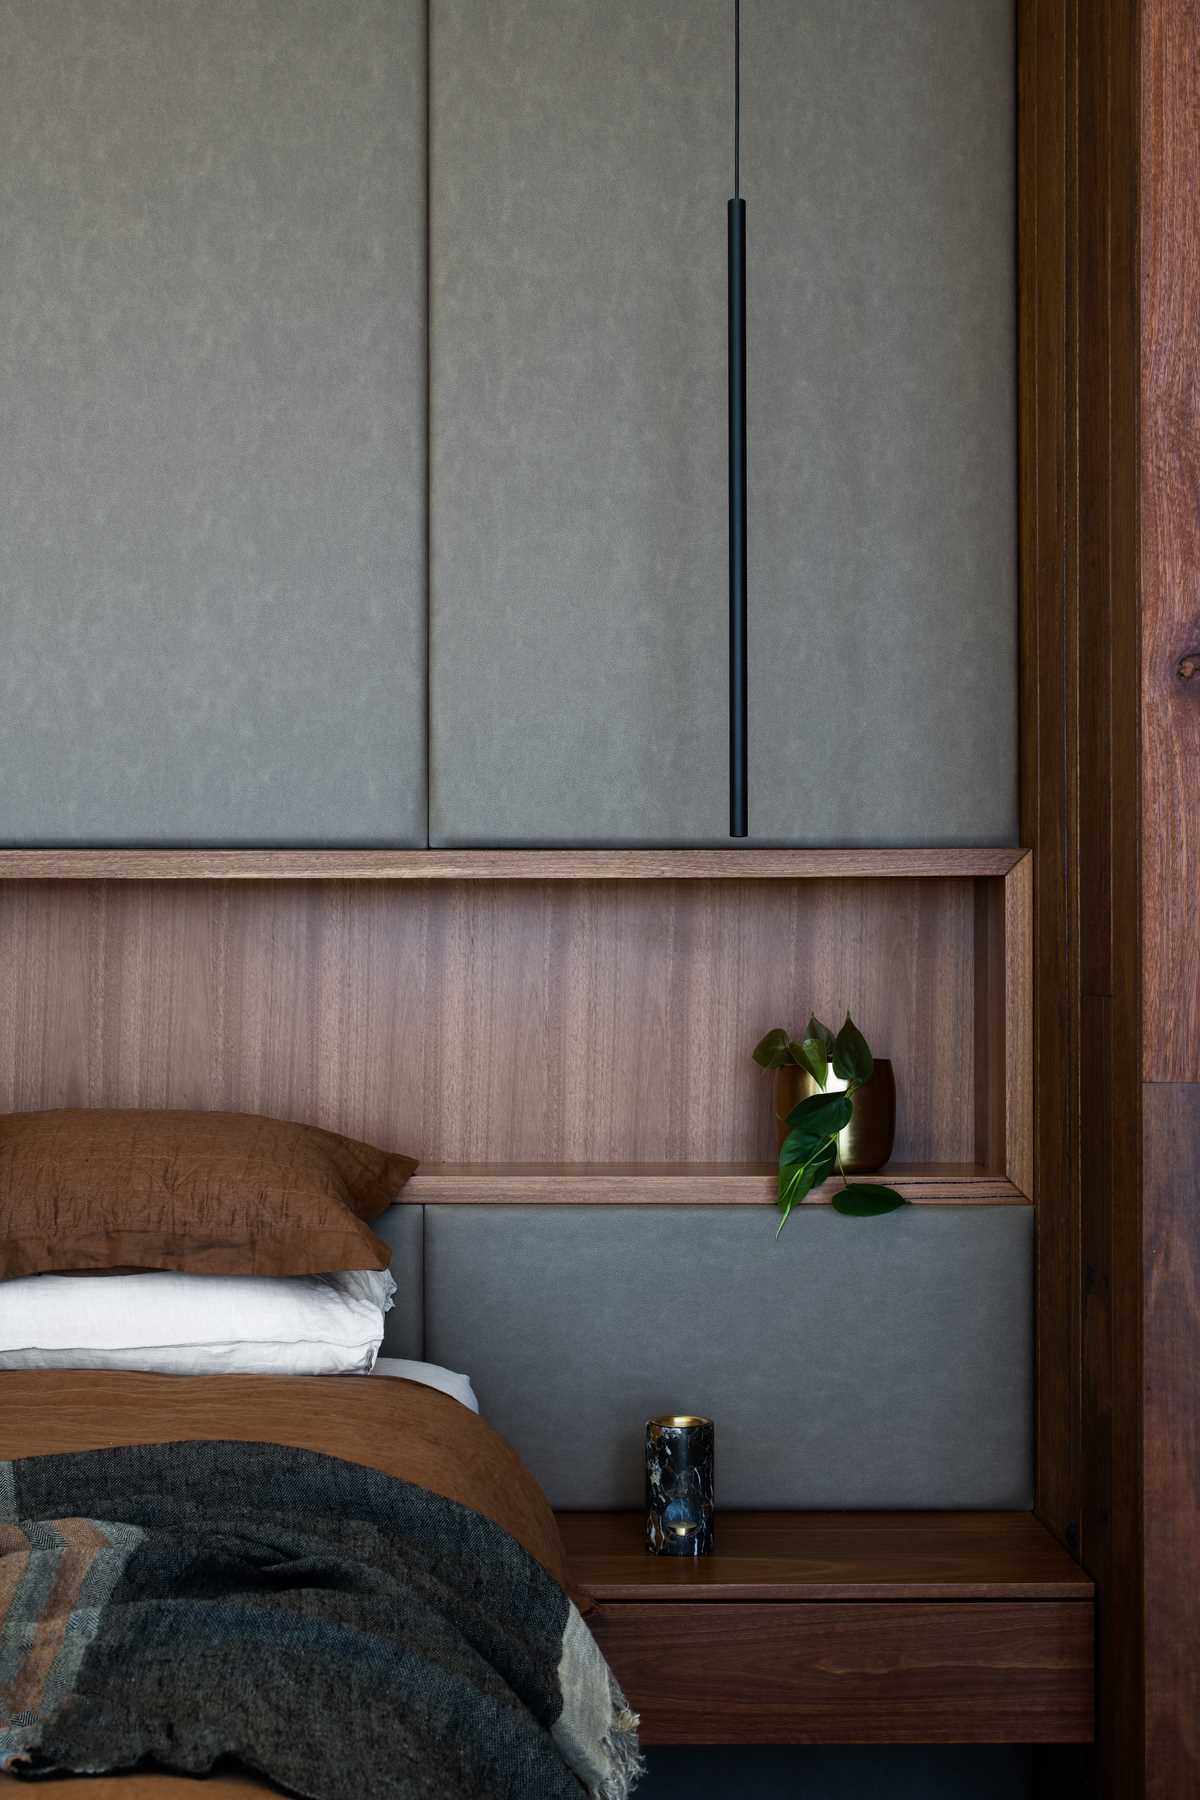 A modern bedroom with an upholstered accent wall that includes a shelving niche.